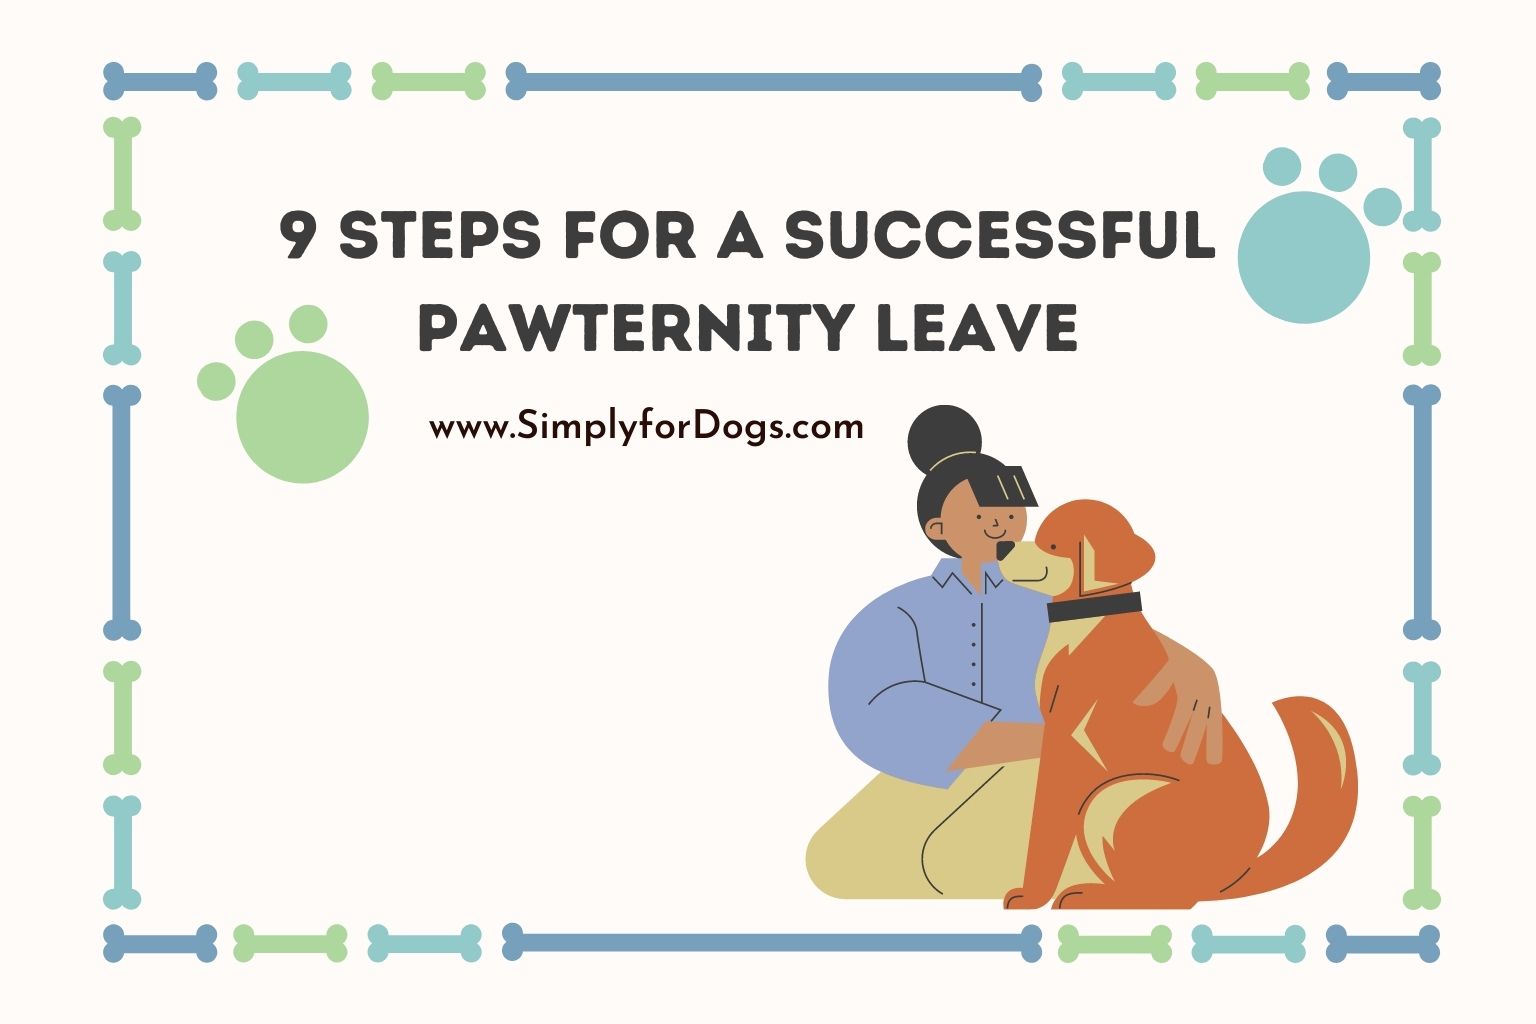 9 Steps for a Successful Pawternity Leave